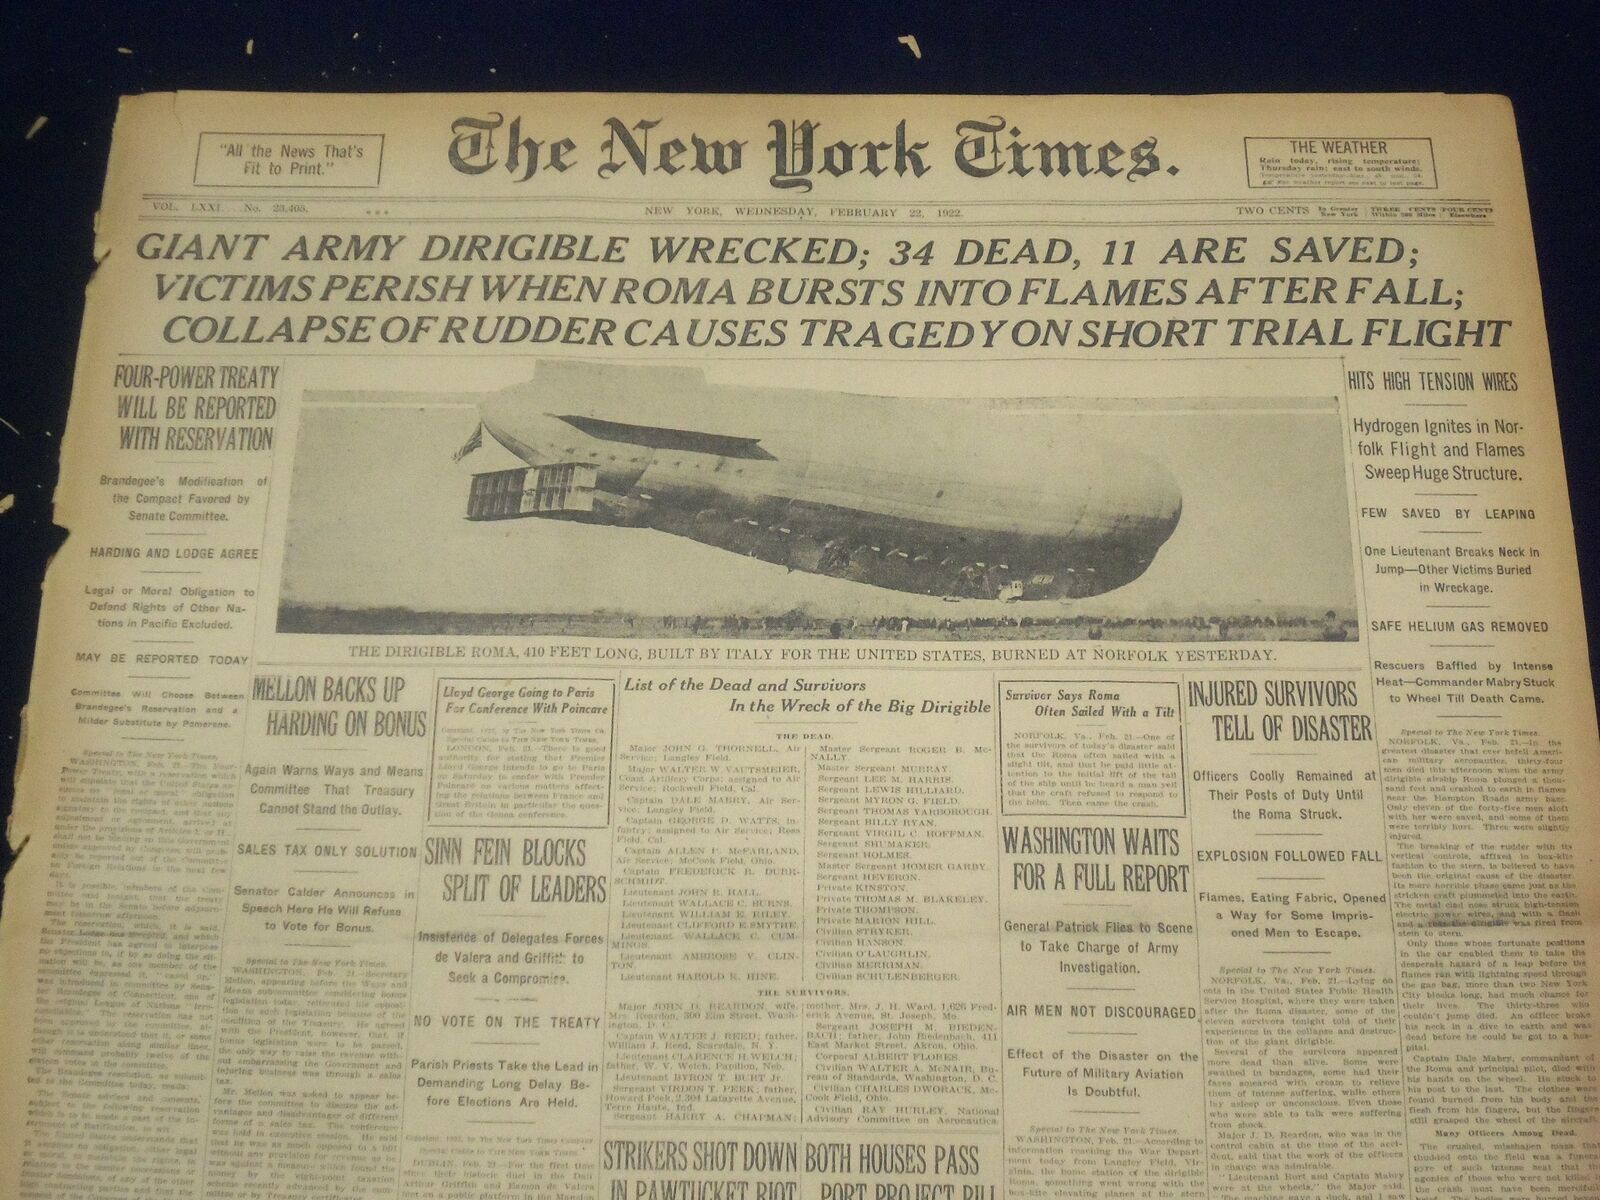 1922 FEBRUARY 22 NEW YORK TIMES - GIANT ARMY DIRIGIBLE WRECKED, 34 DEAD- NT 9022